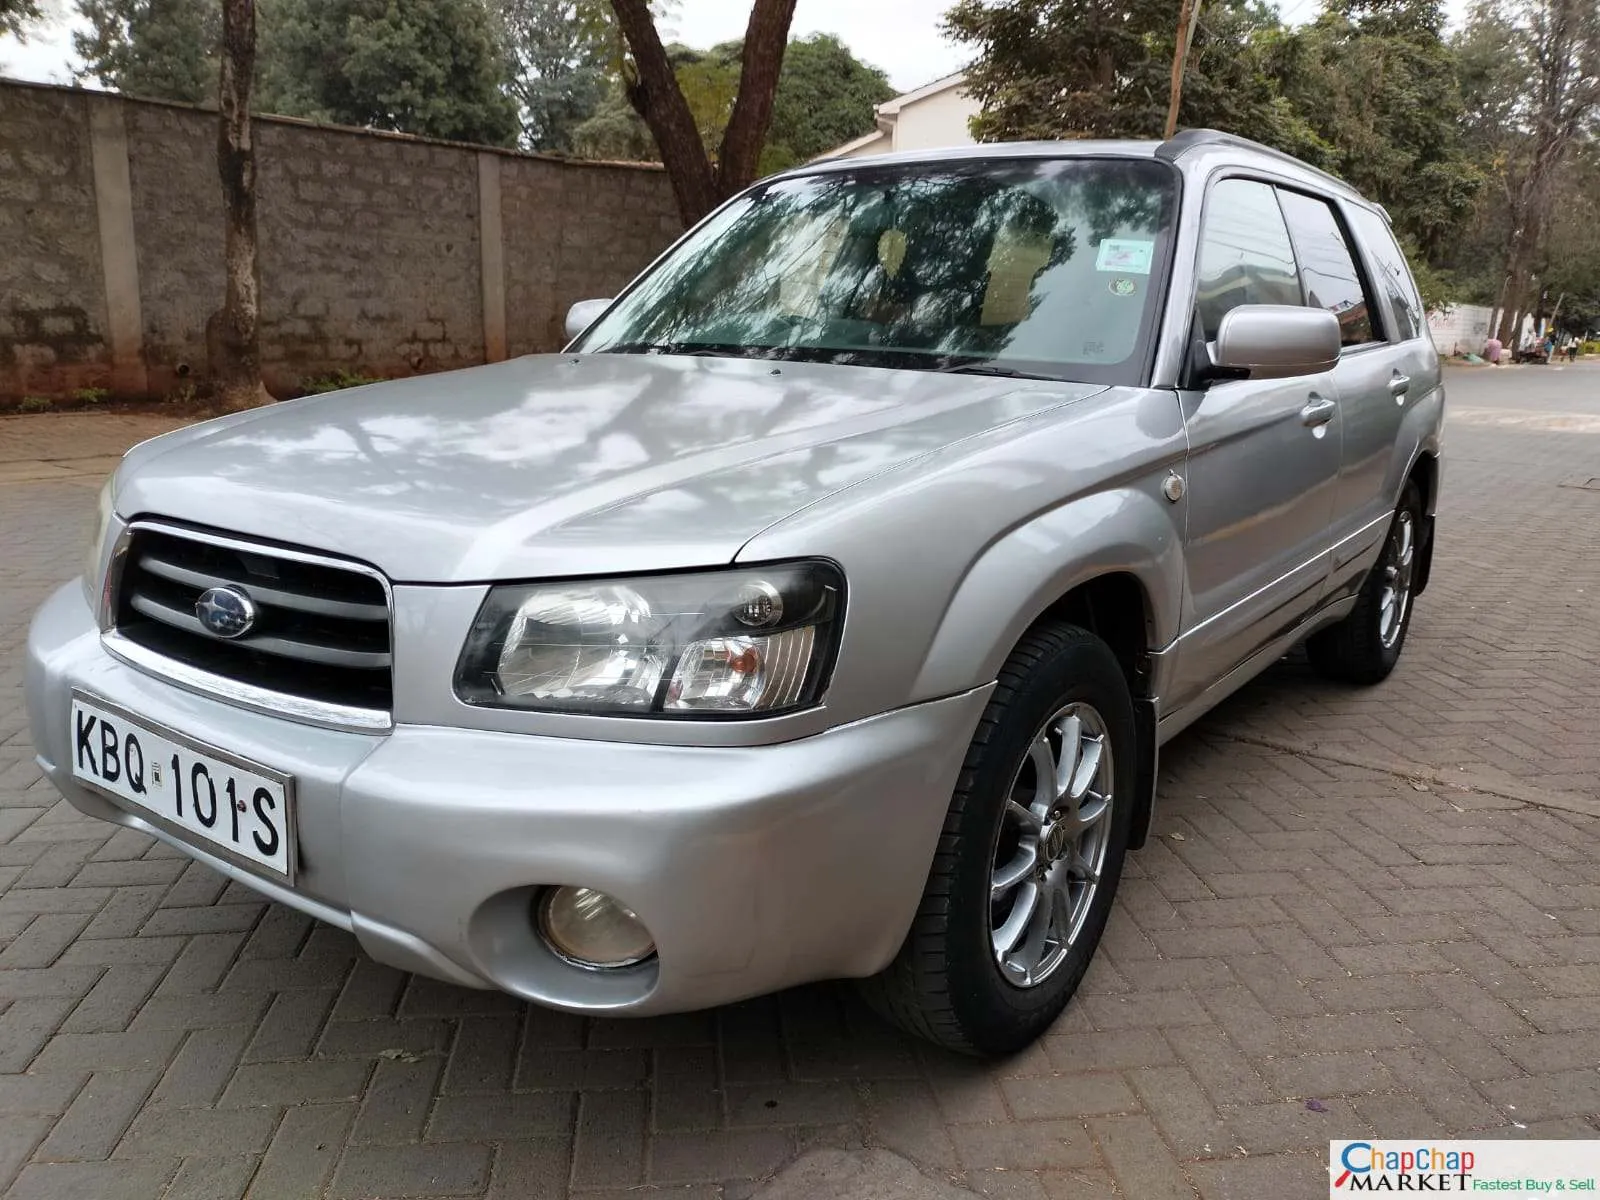 Cars Cars For Sale/Vehicles-Subaru Forester for sale in Kenya SG5 Pay 30% deposit Trade in Ok EXCLUSIVE 9